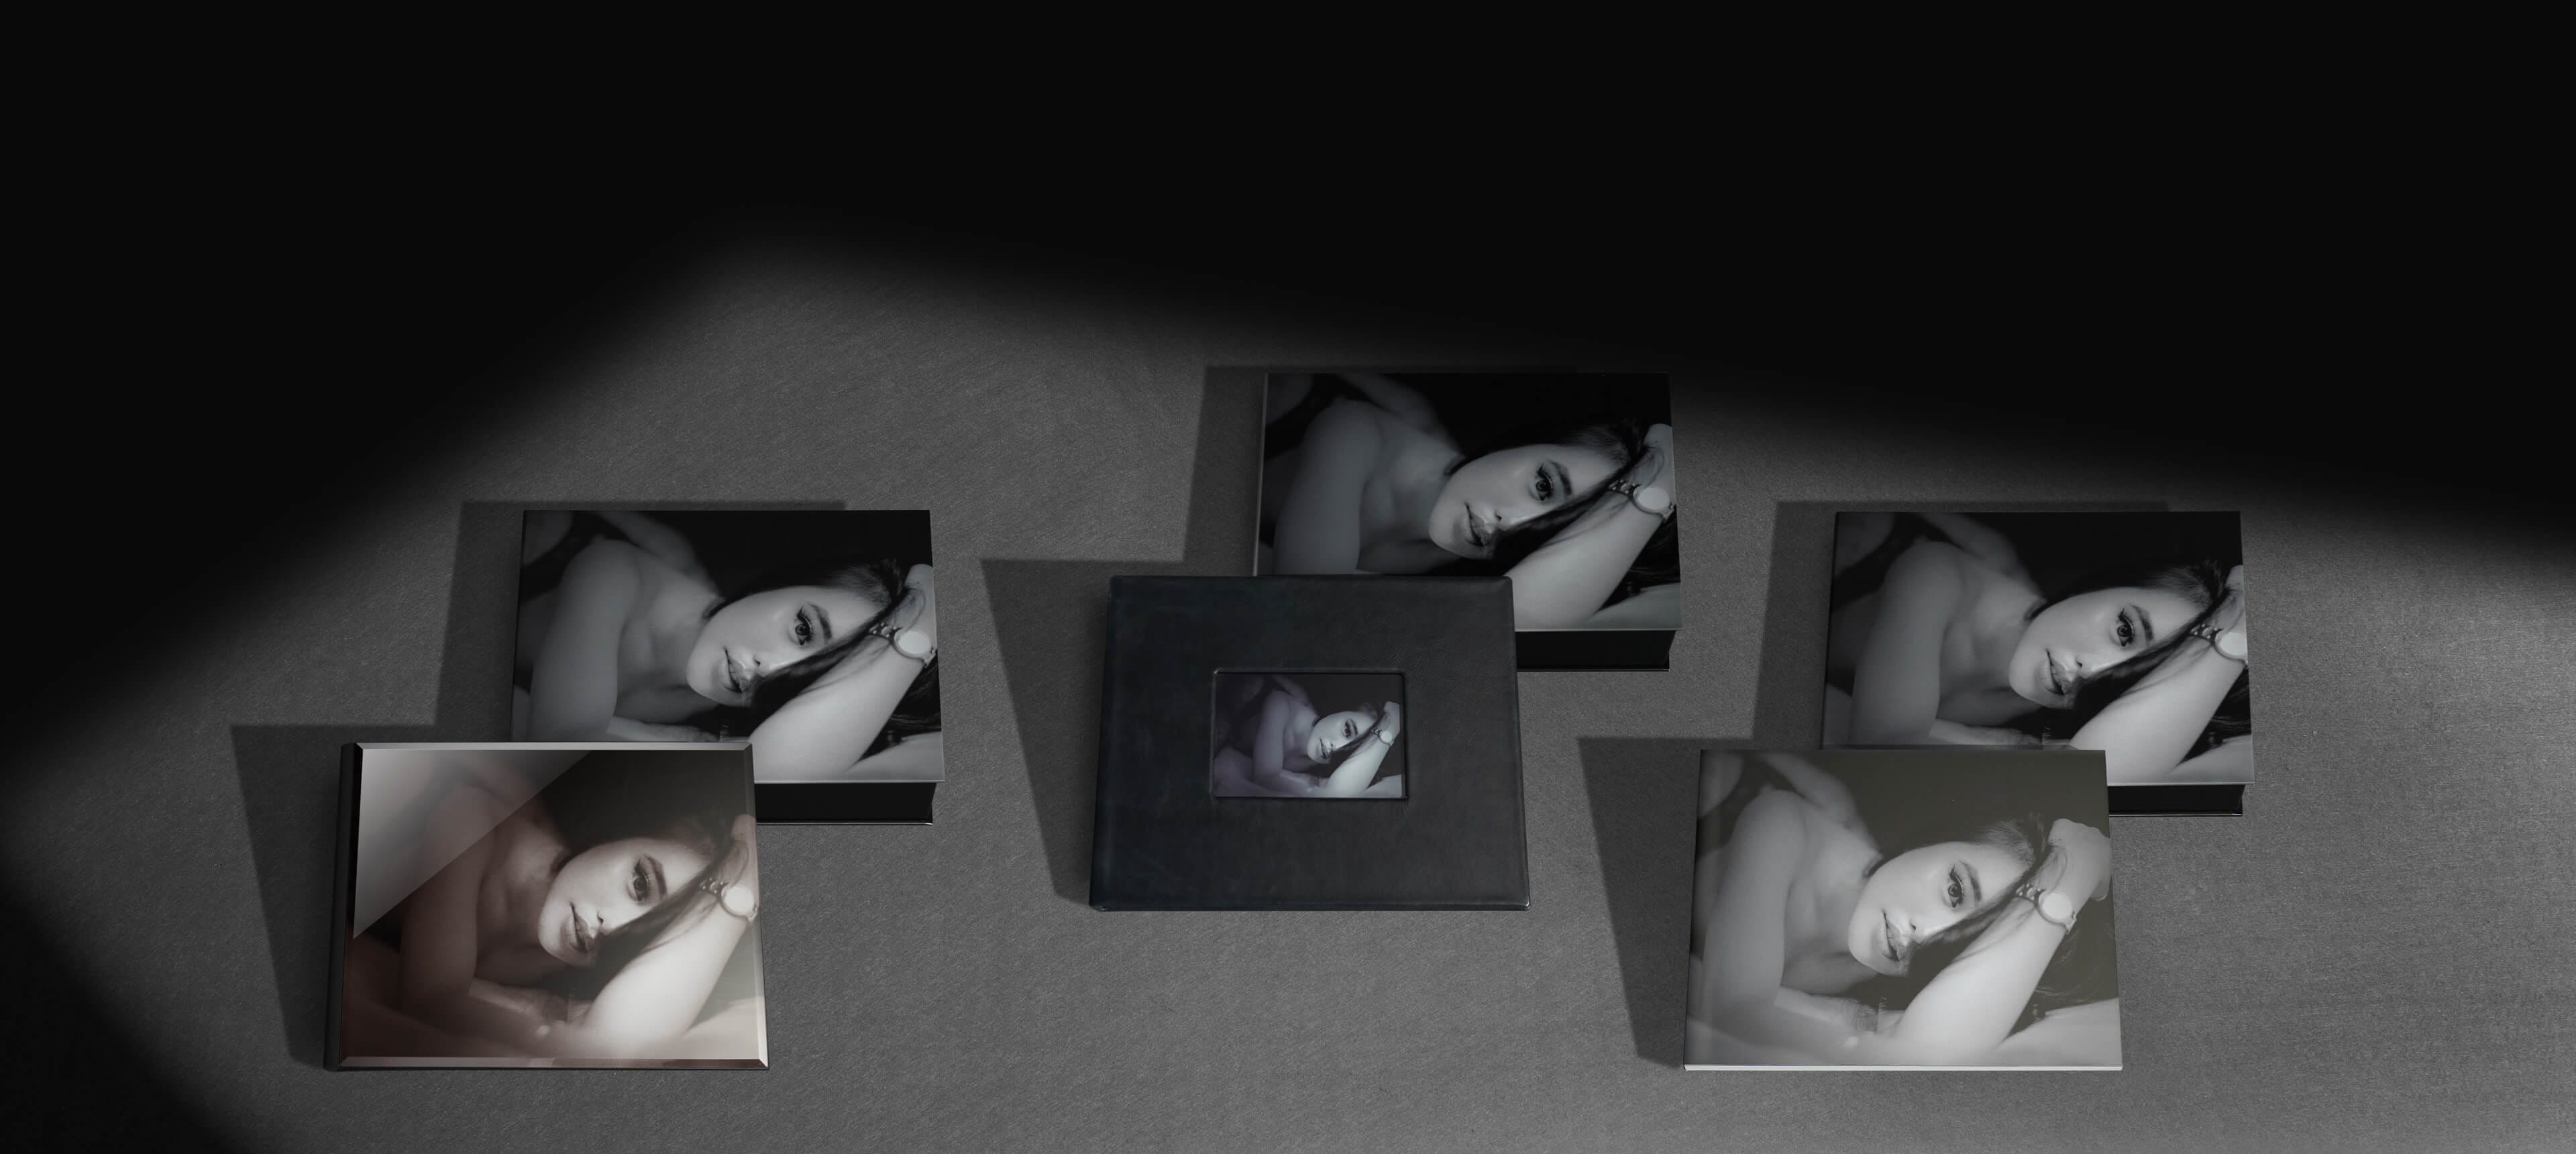 three image boxes with album leaning against them showing woman in lingerie